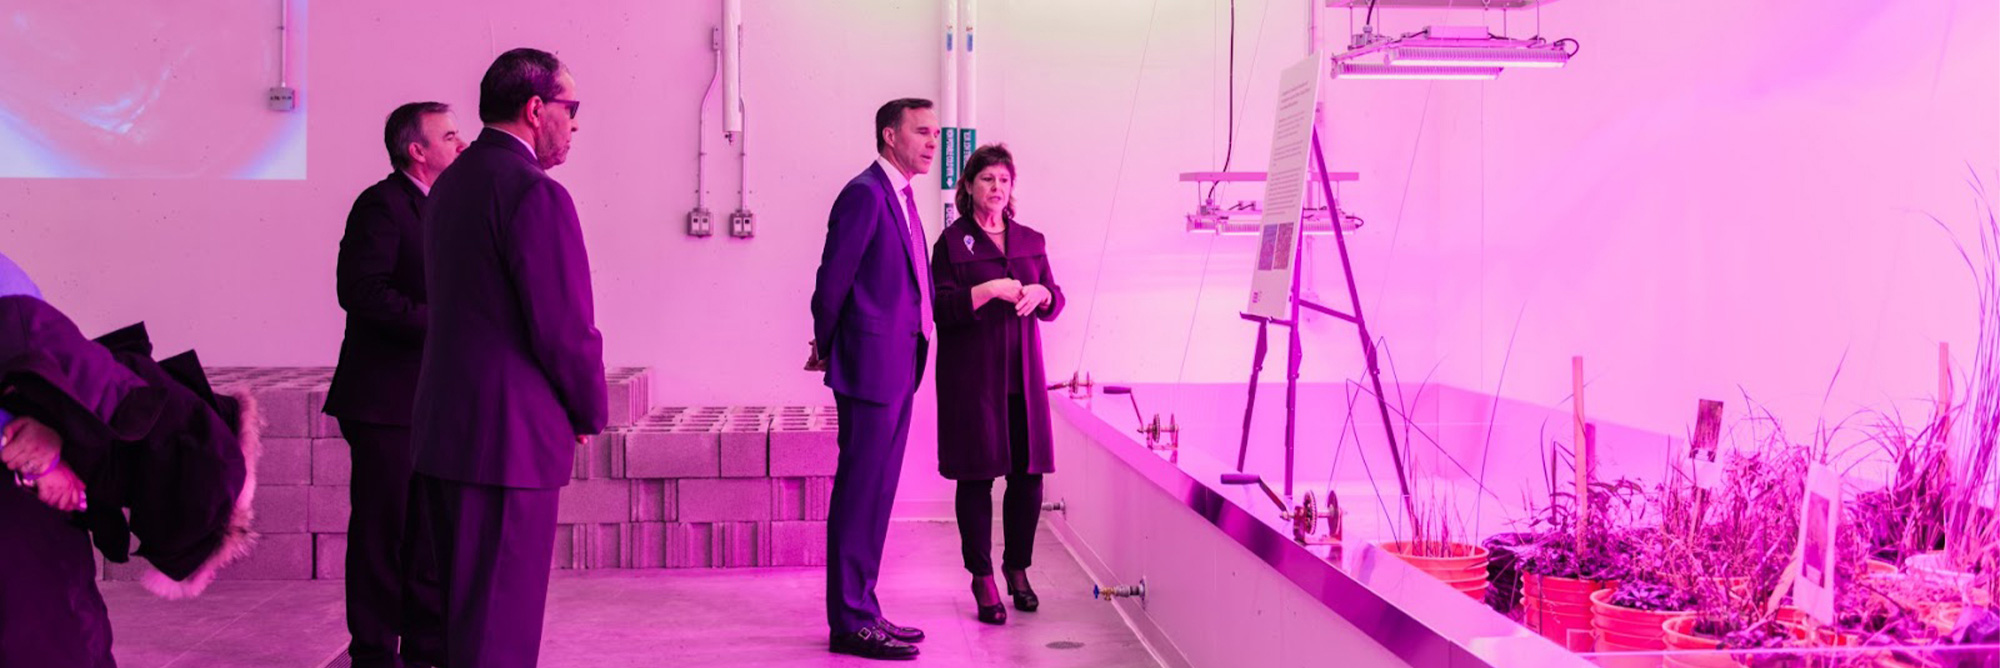 Lynda describes her wetlands research to Federal Finance Minister Bill Morneau and President Lachemi. (February 2019. RUW Wetland Cells, Centre for Urban Innovation).